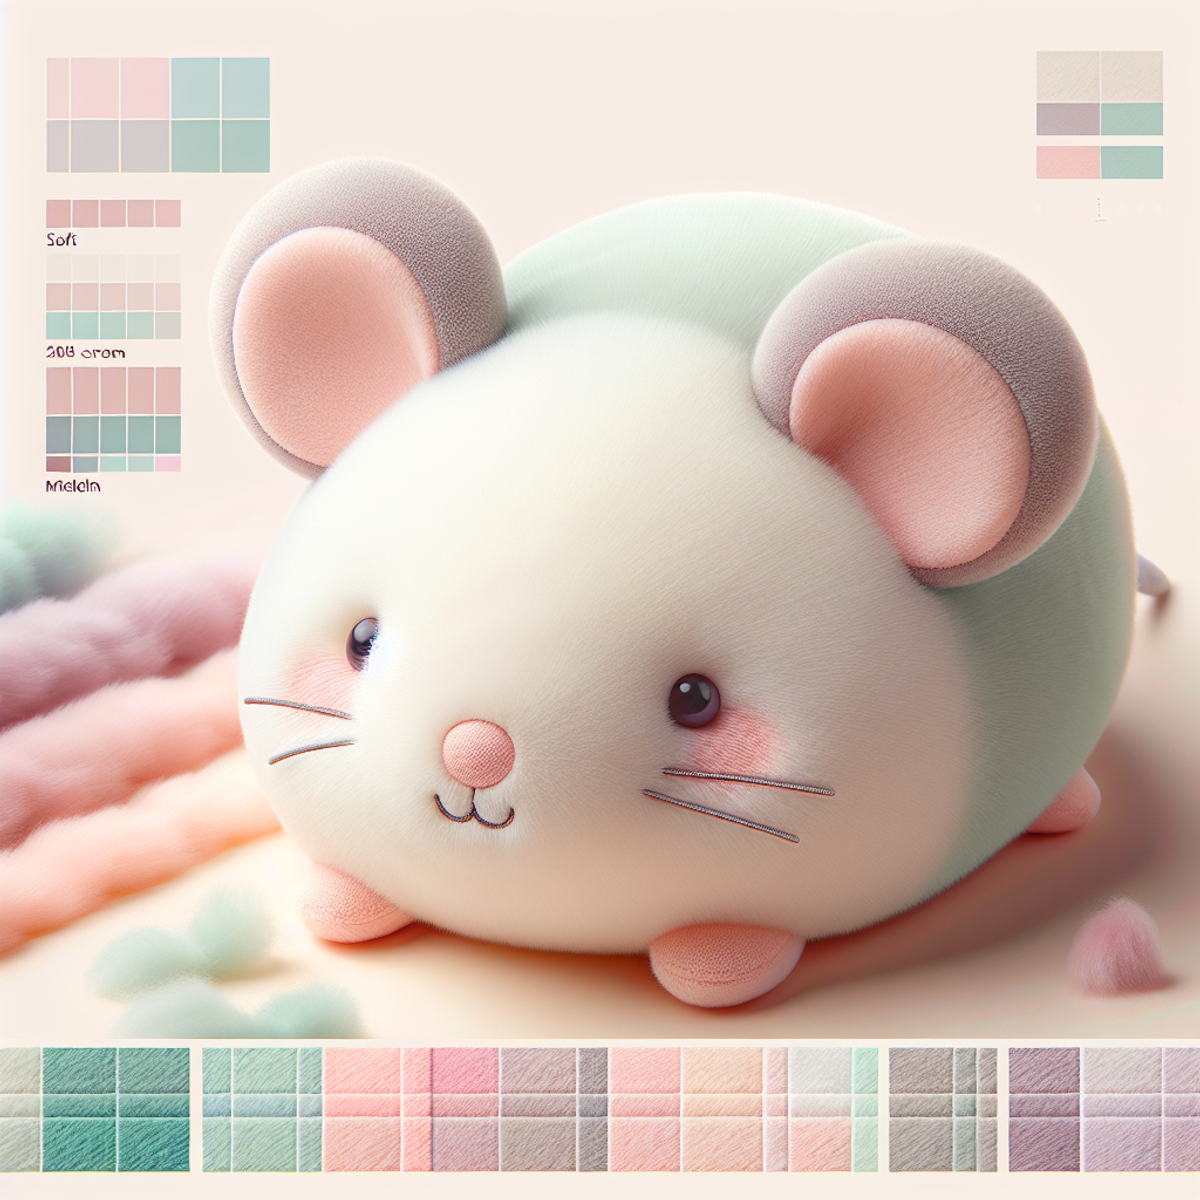 Fluffy toy mouse with pastel colors and gentle smile